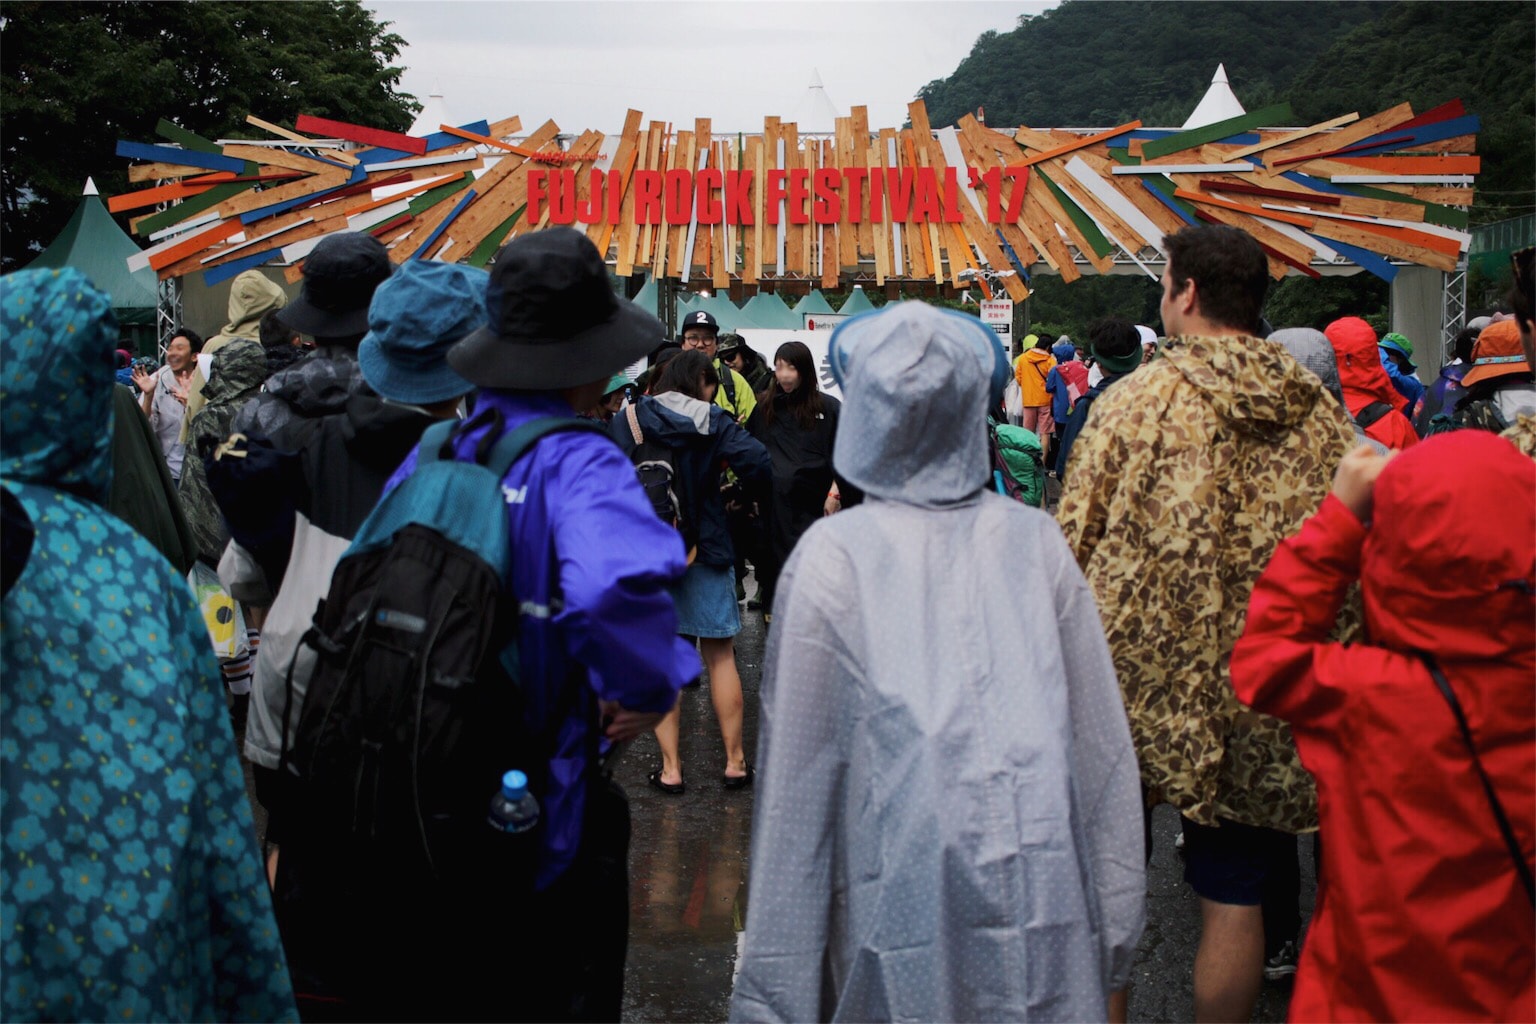 FUJI ROCK FESTIVAL ‘17 – Day 2 never young beach cornelius the avalanches aphex twin punpee